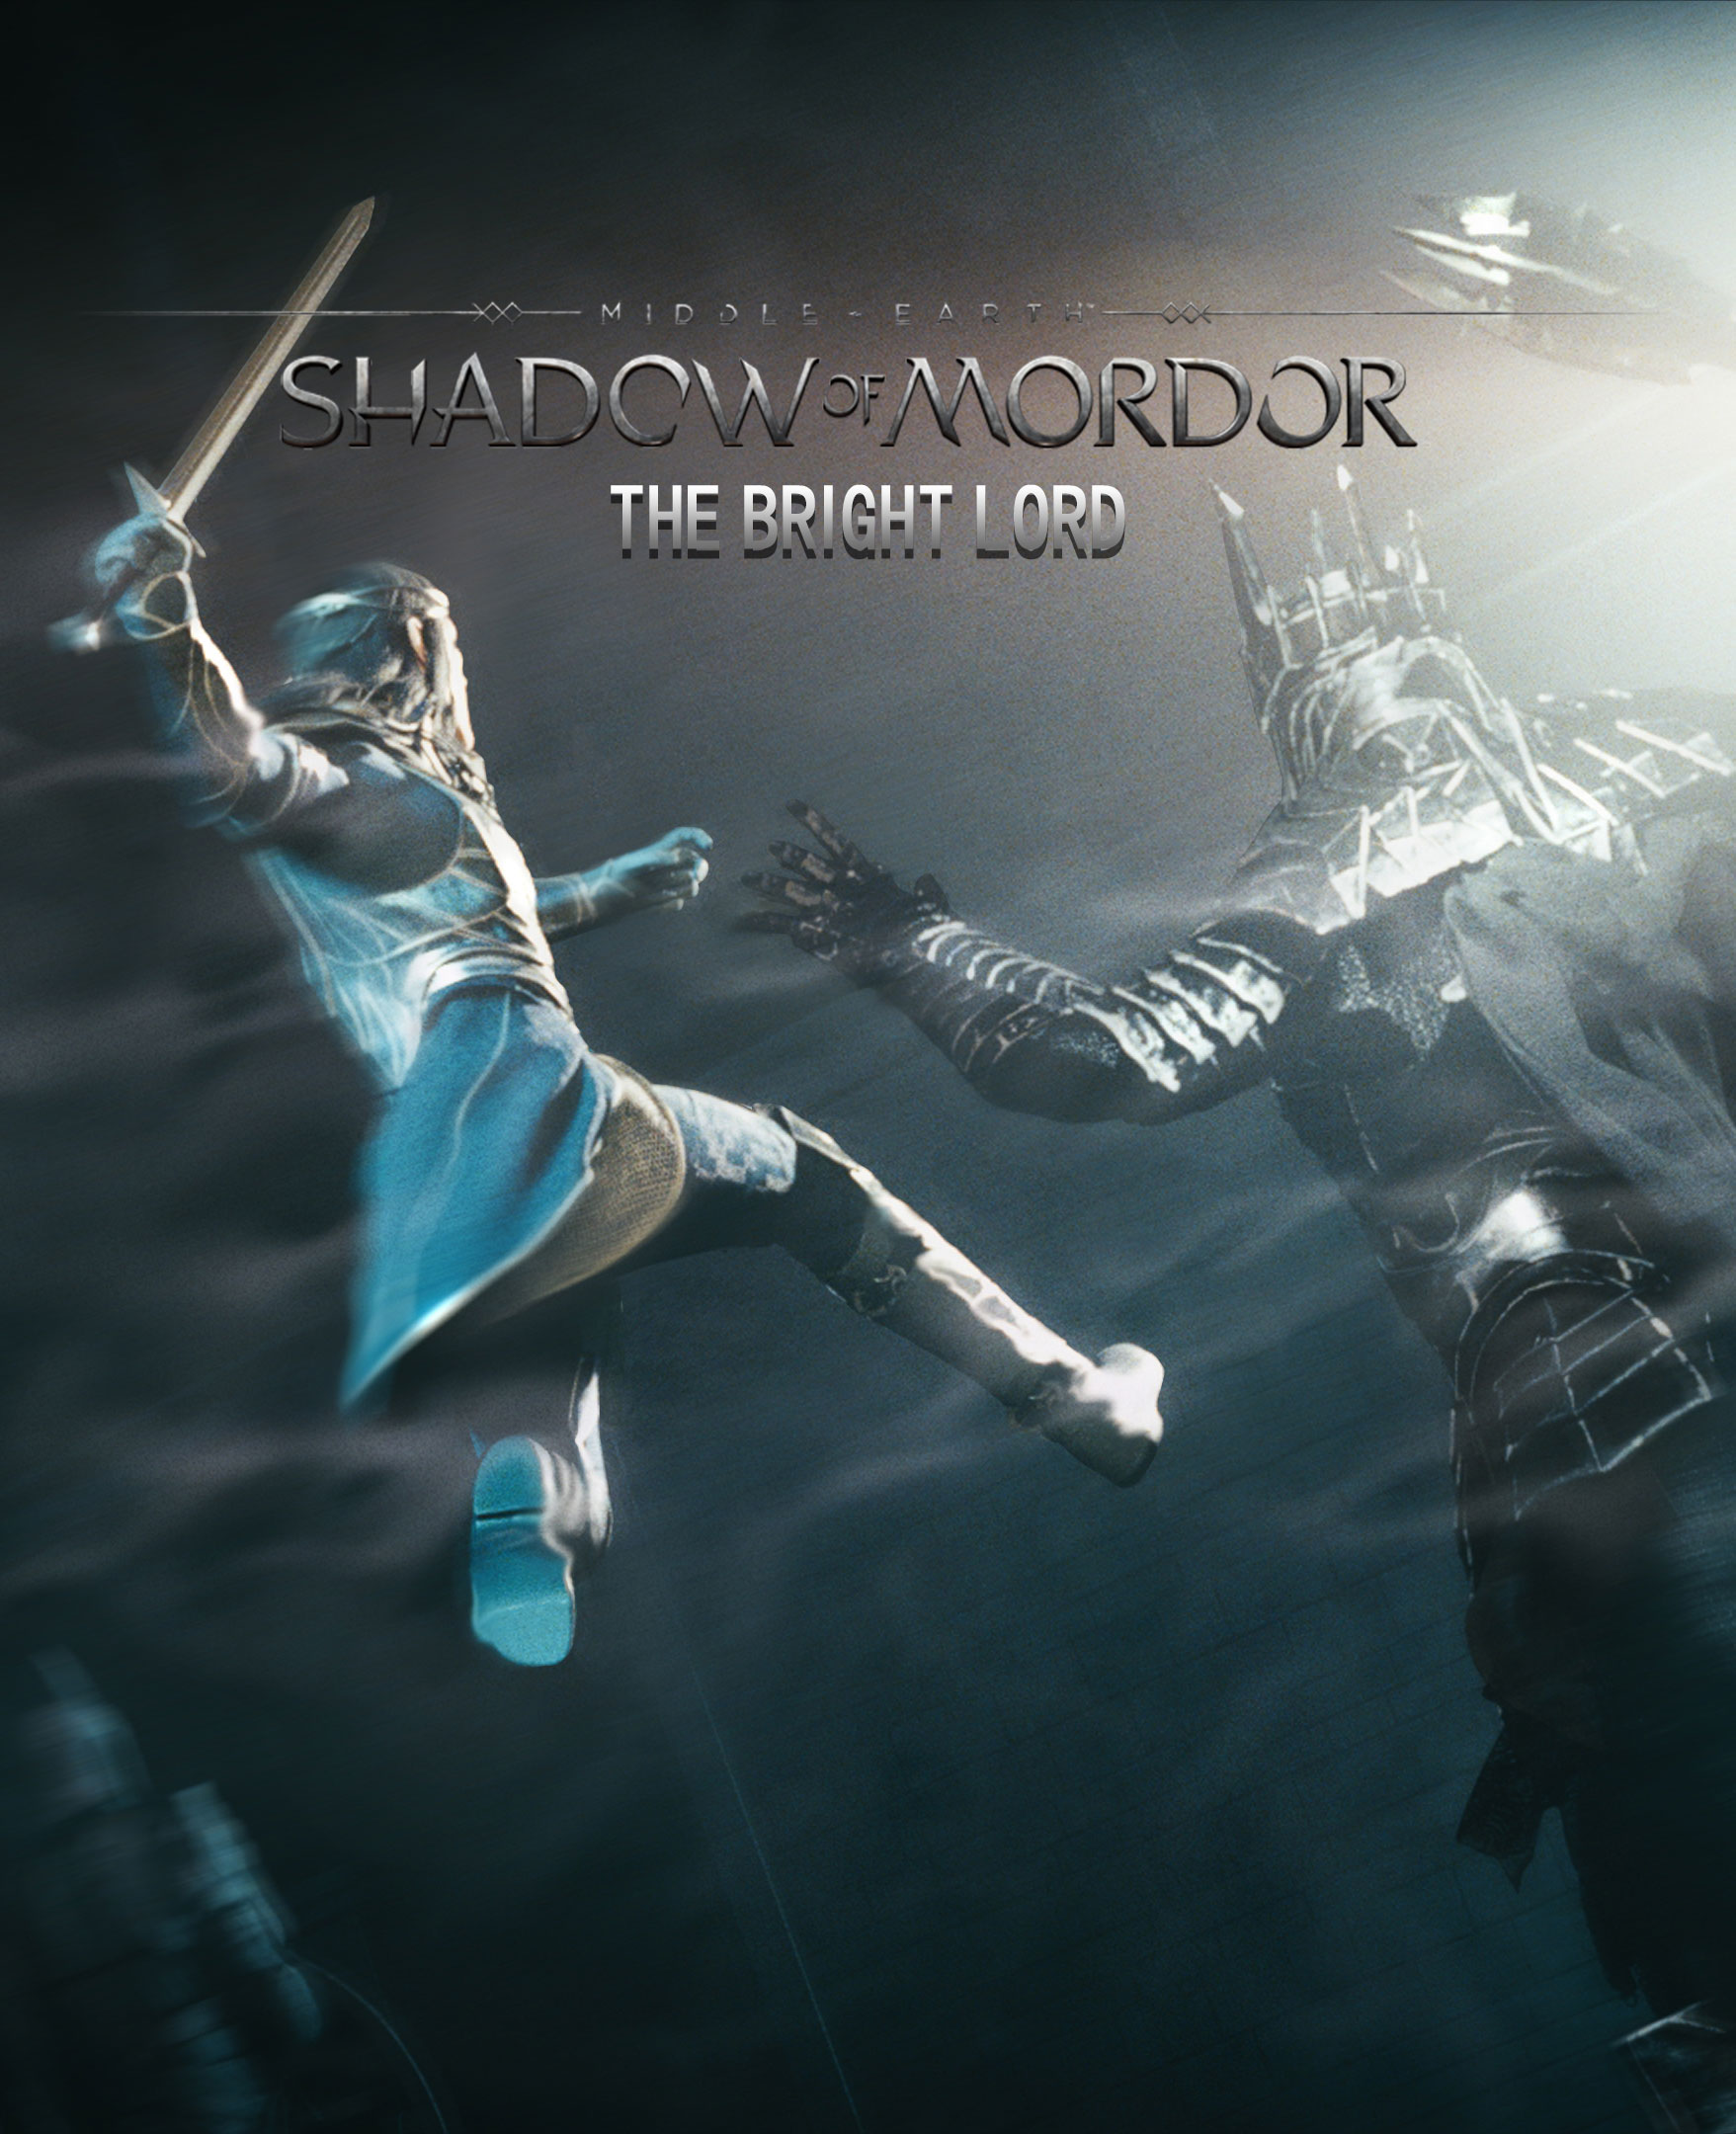 Middle-earth™: Shadow of Mordor™ -  The Bright Lord